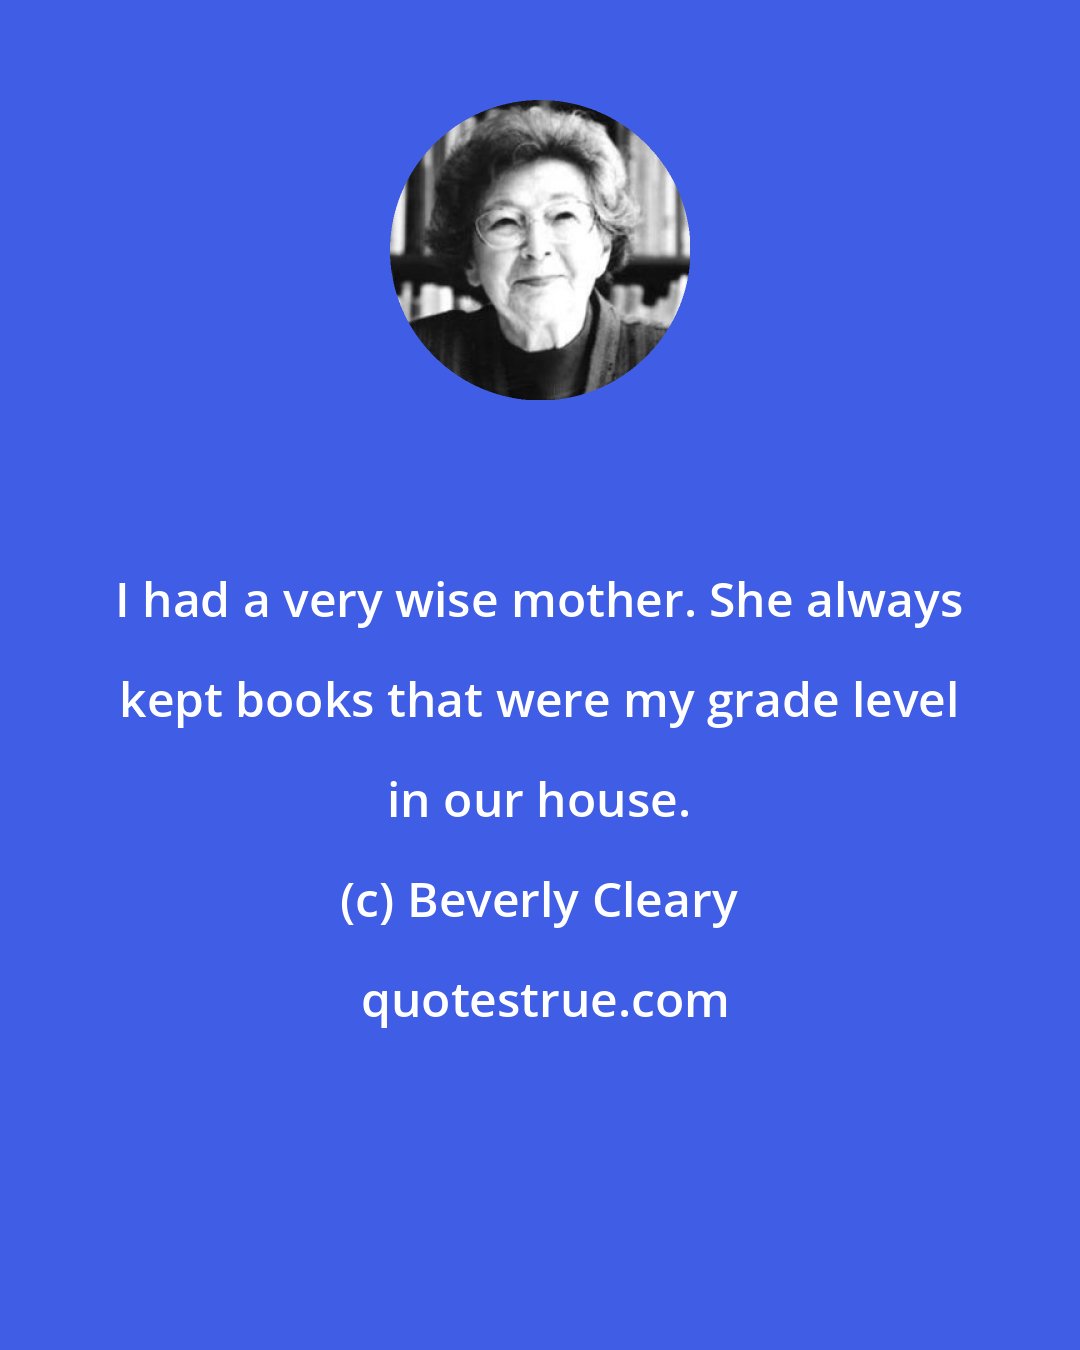 Beverly Cleary: I had a very wise mother. She always kept books that were my grade level in our house.